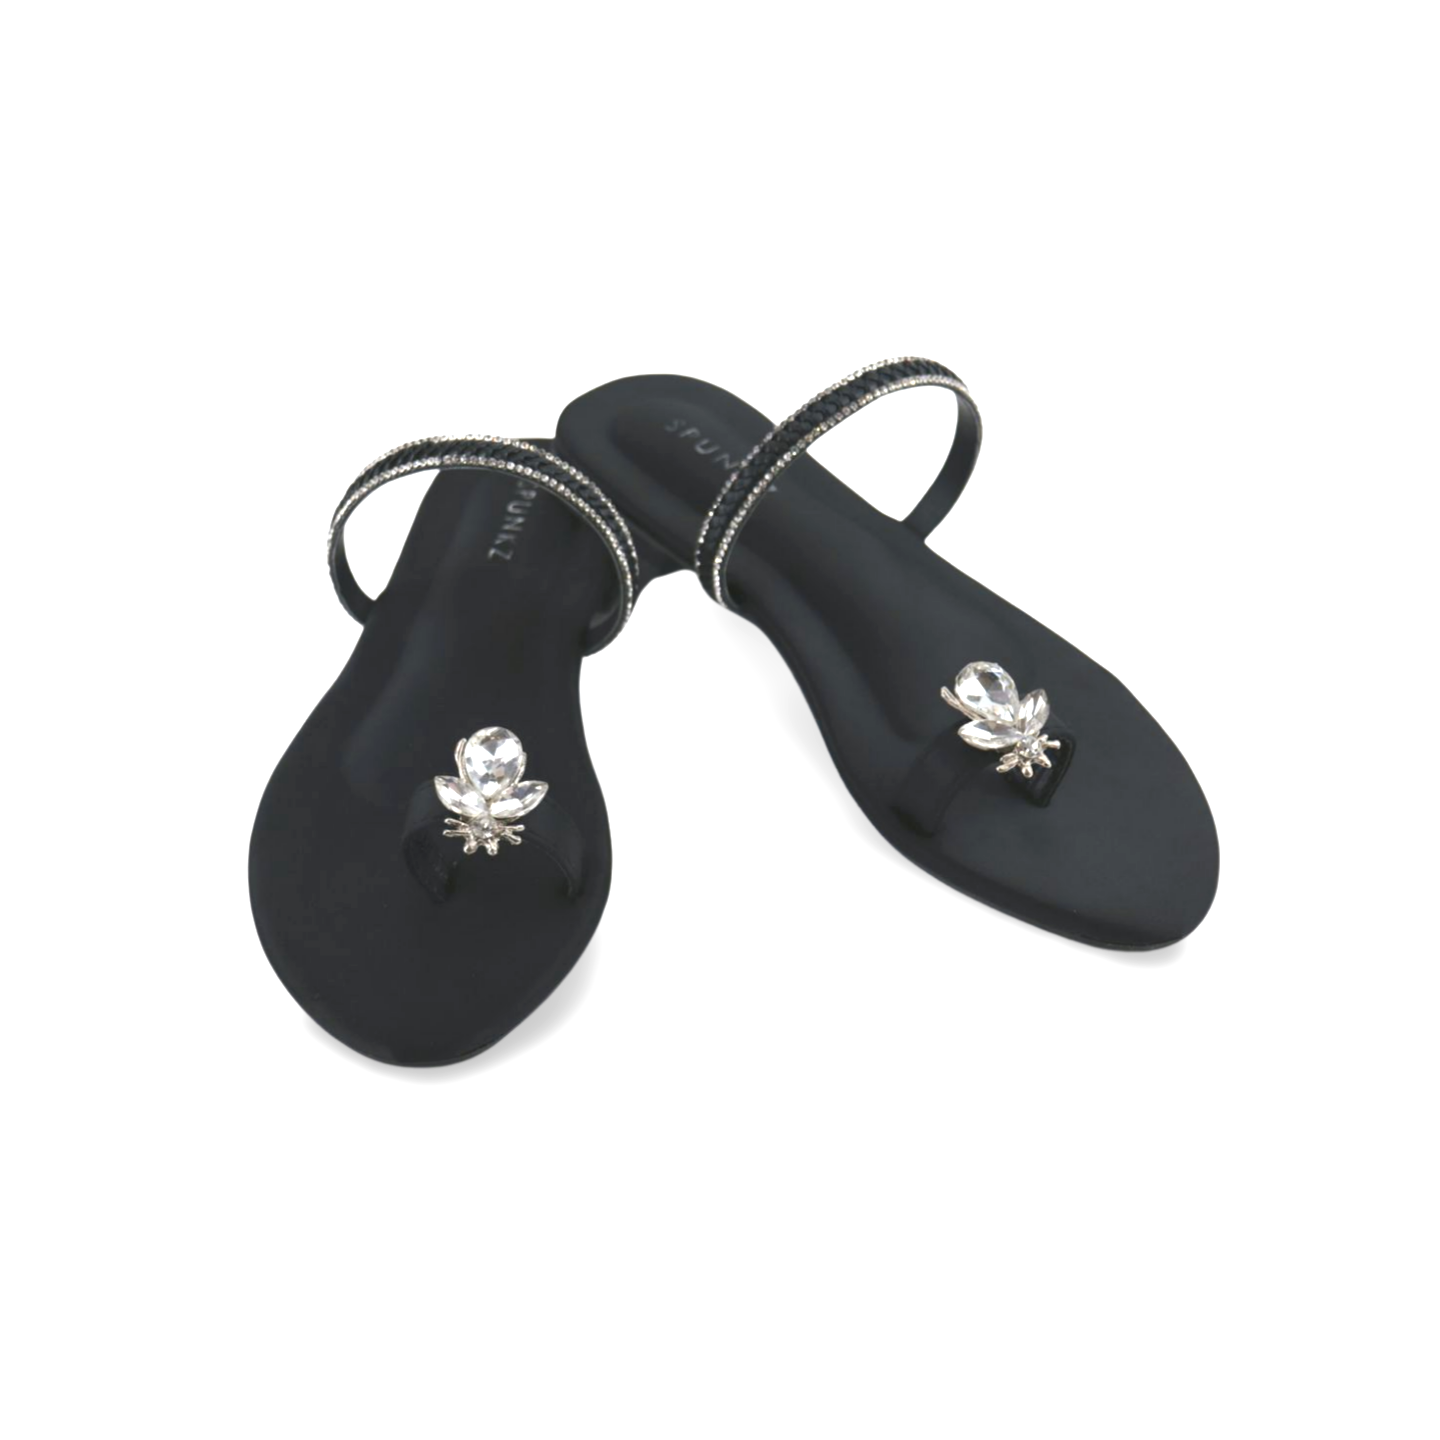 Flat Sandals with Rhinestone Ankle Strap and Honeybee Buckle on Thumb